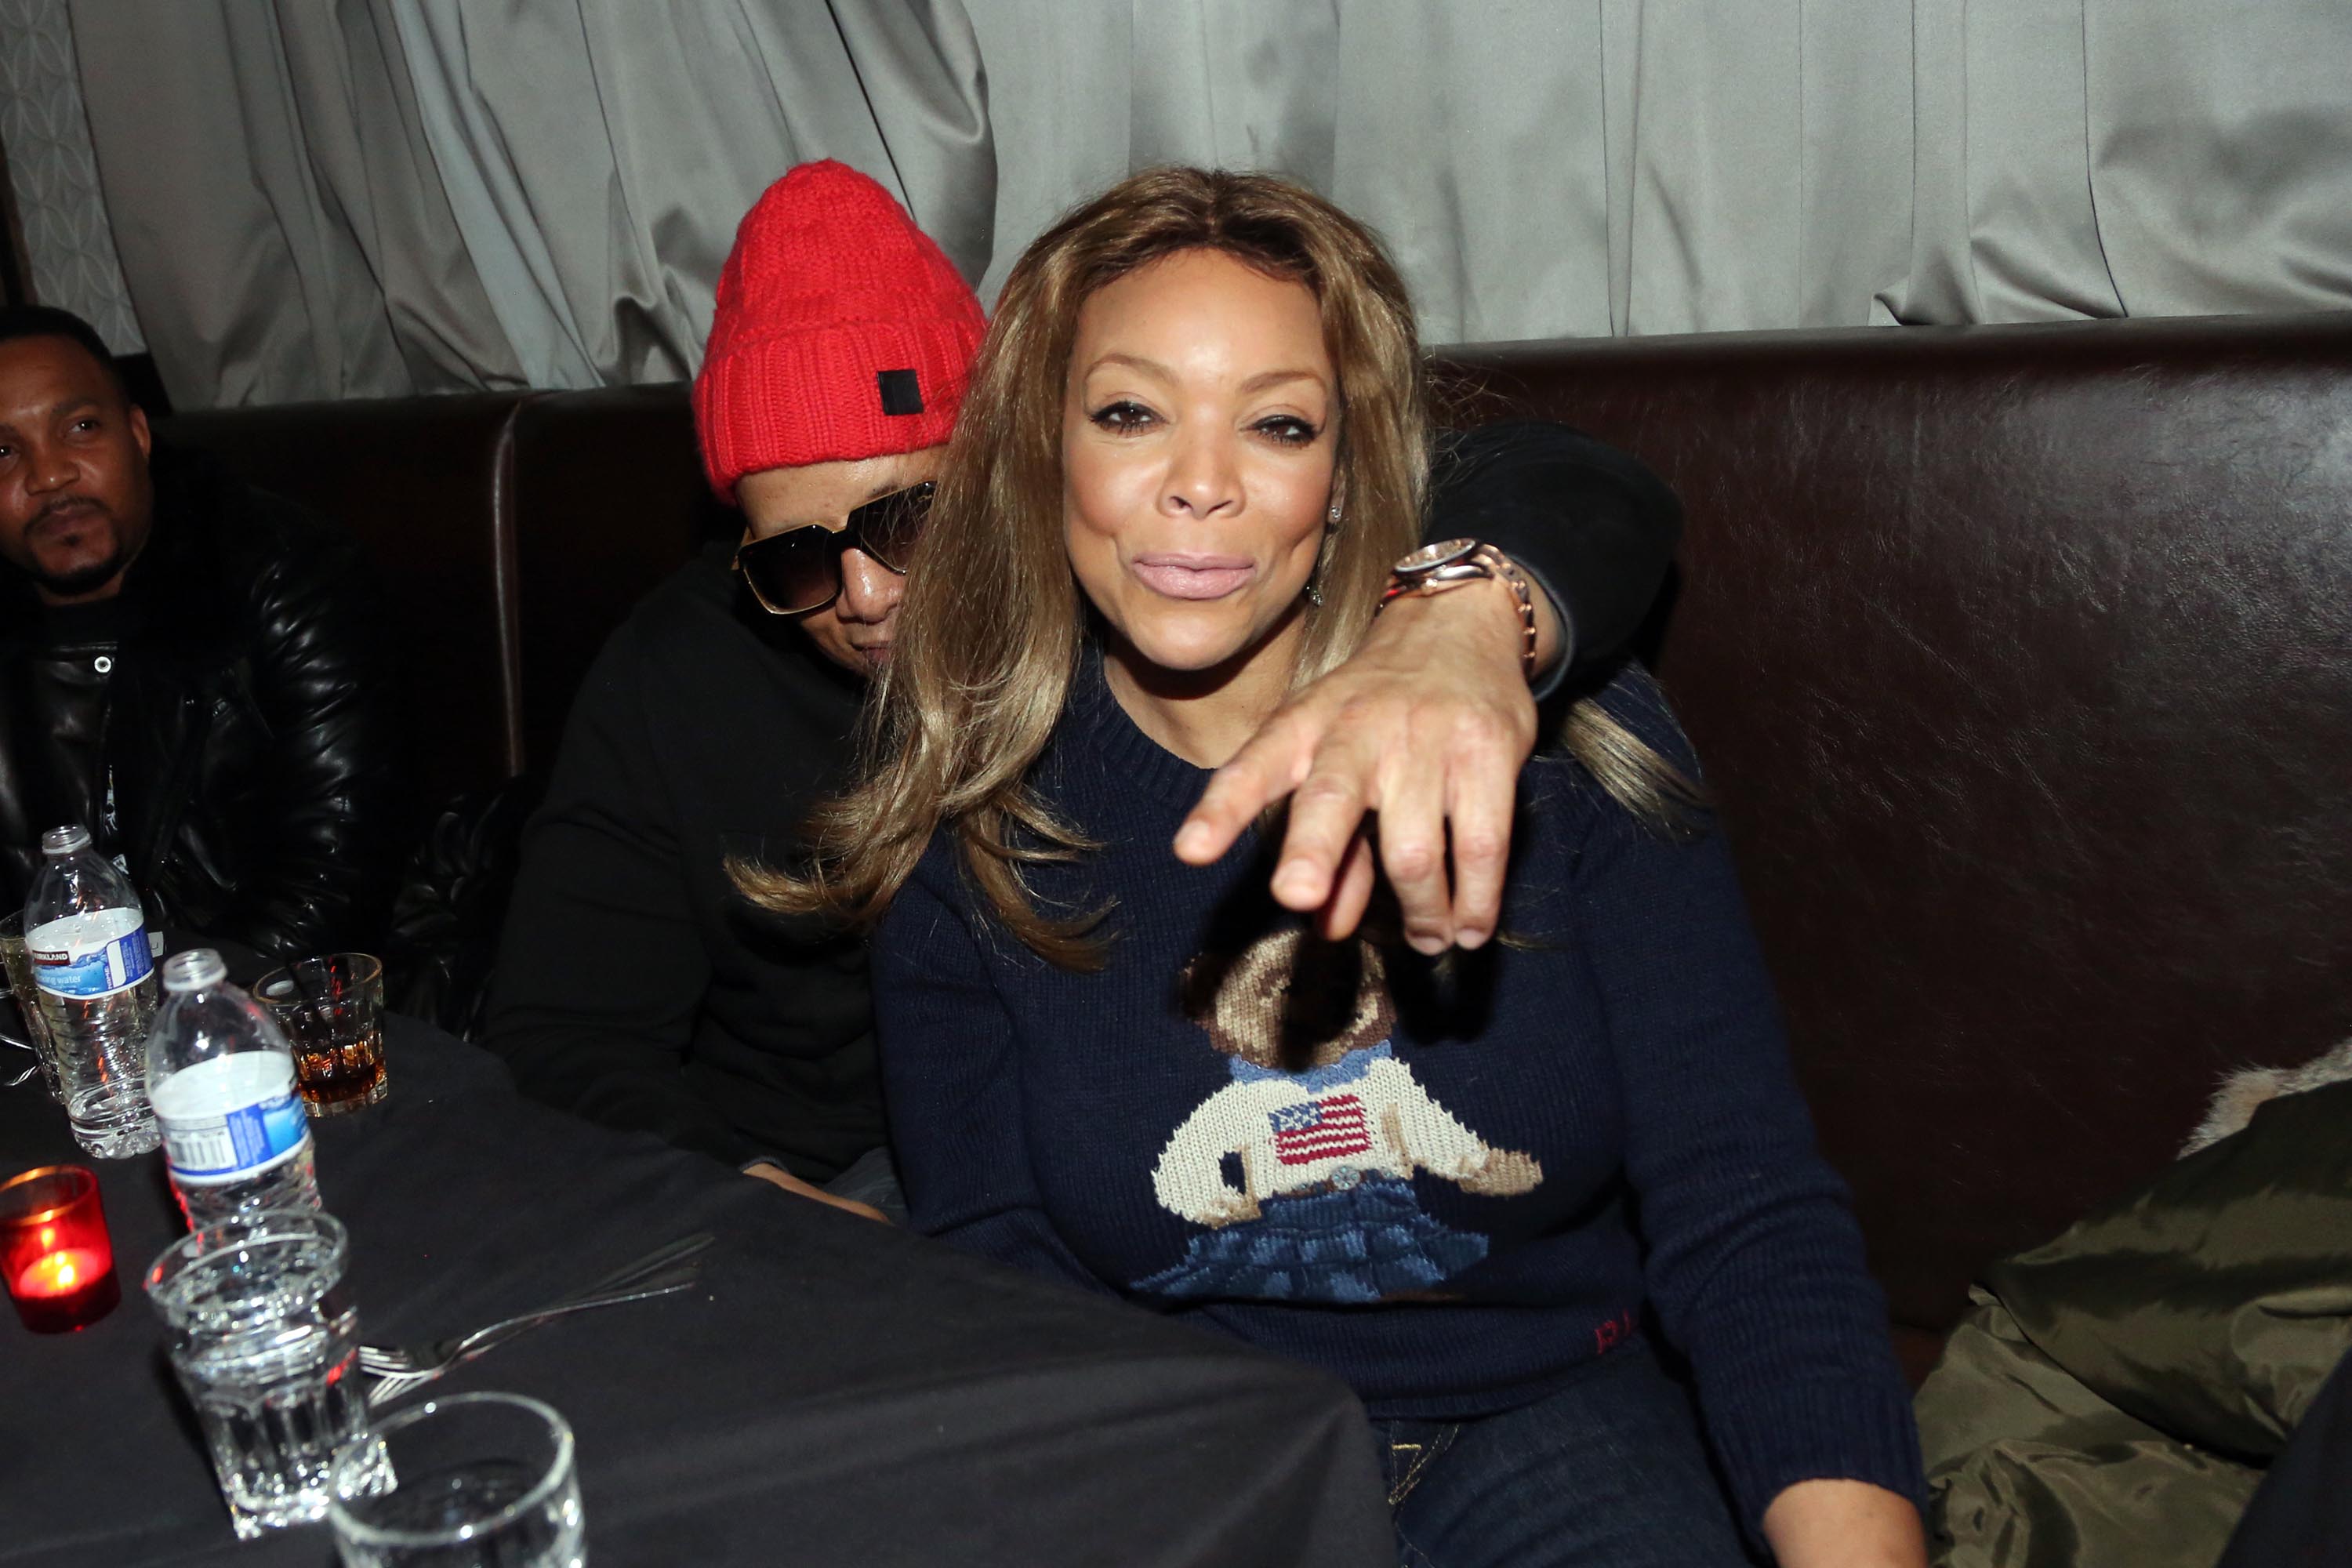 Wendy Williams and Kevin Hunter attend the Smif N Wessun - Dah Shinin' 20 Year Anniversary concert at S.O.B.'s on January 14, 2015 in New York City. | Source: Getty Images